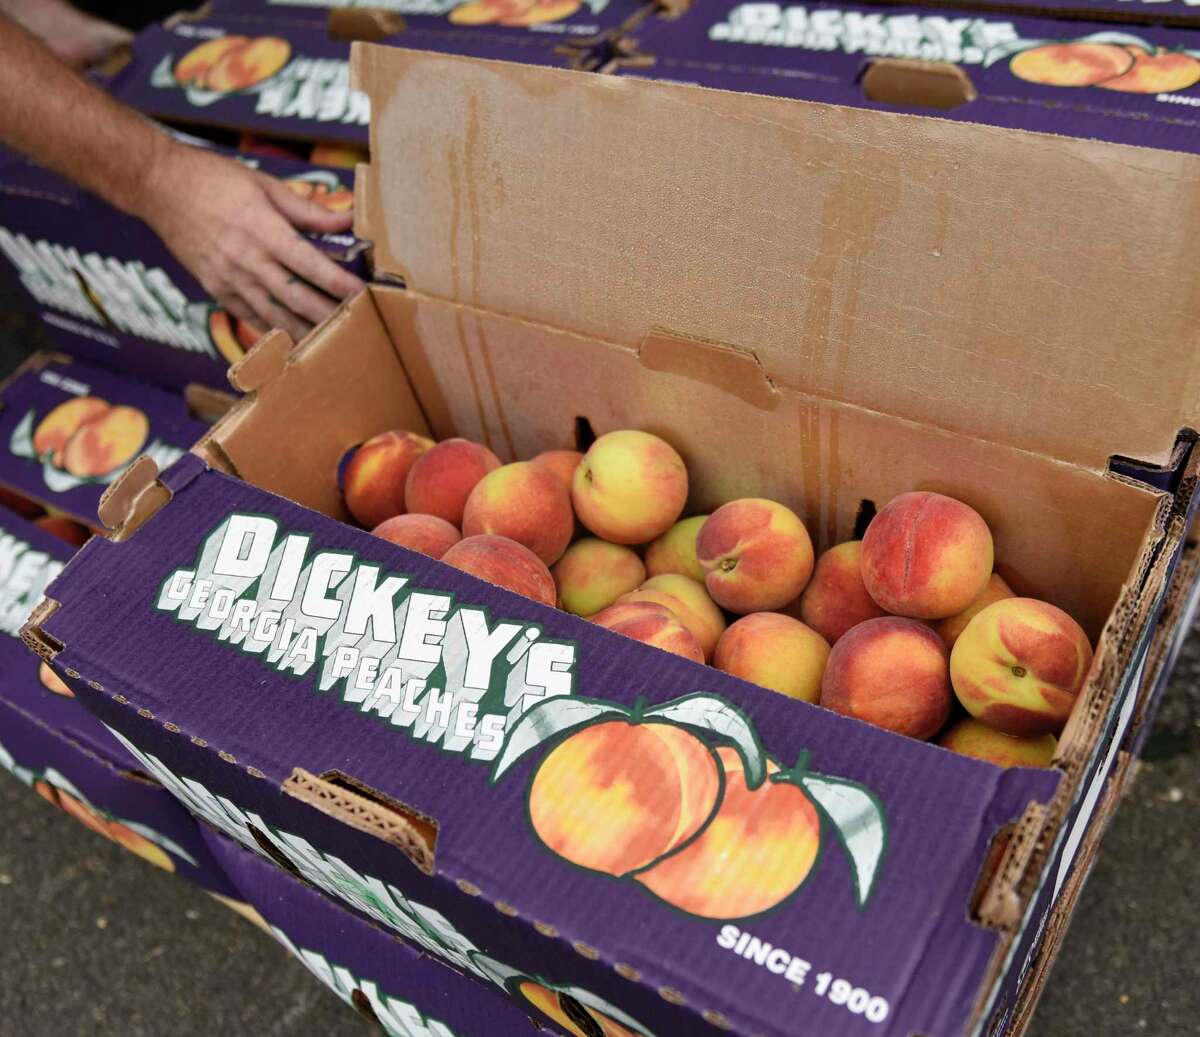 In photos The Peach Truck brings a shipment of fresh fruit direct to